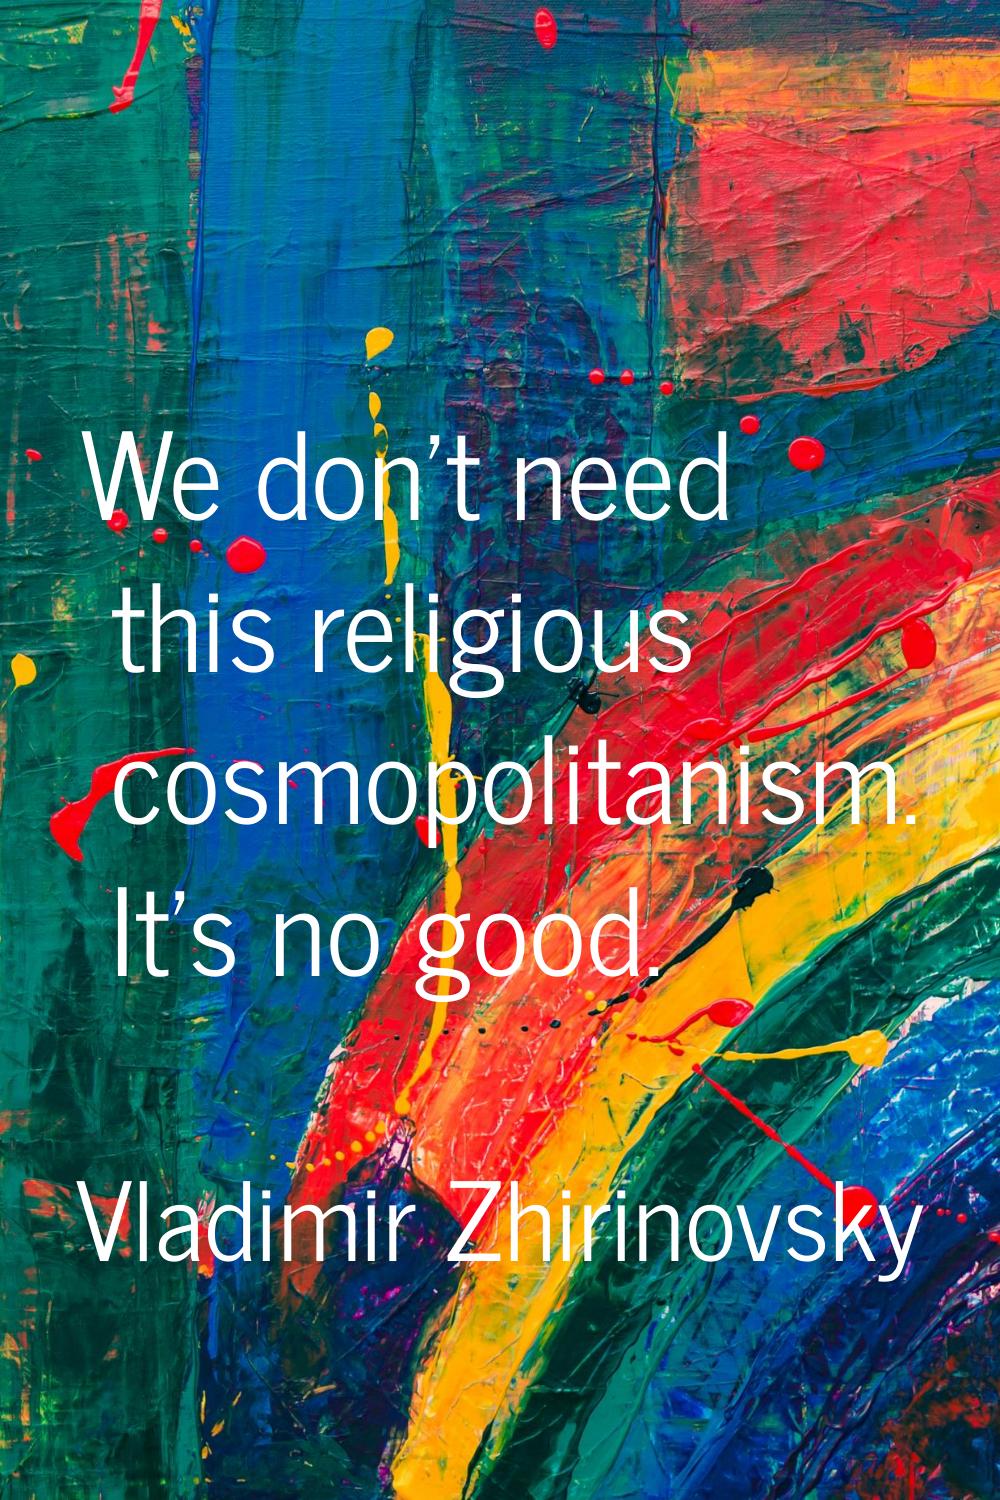 We don't need this religious cosmopolitanism. It's no good.